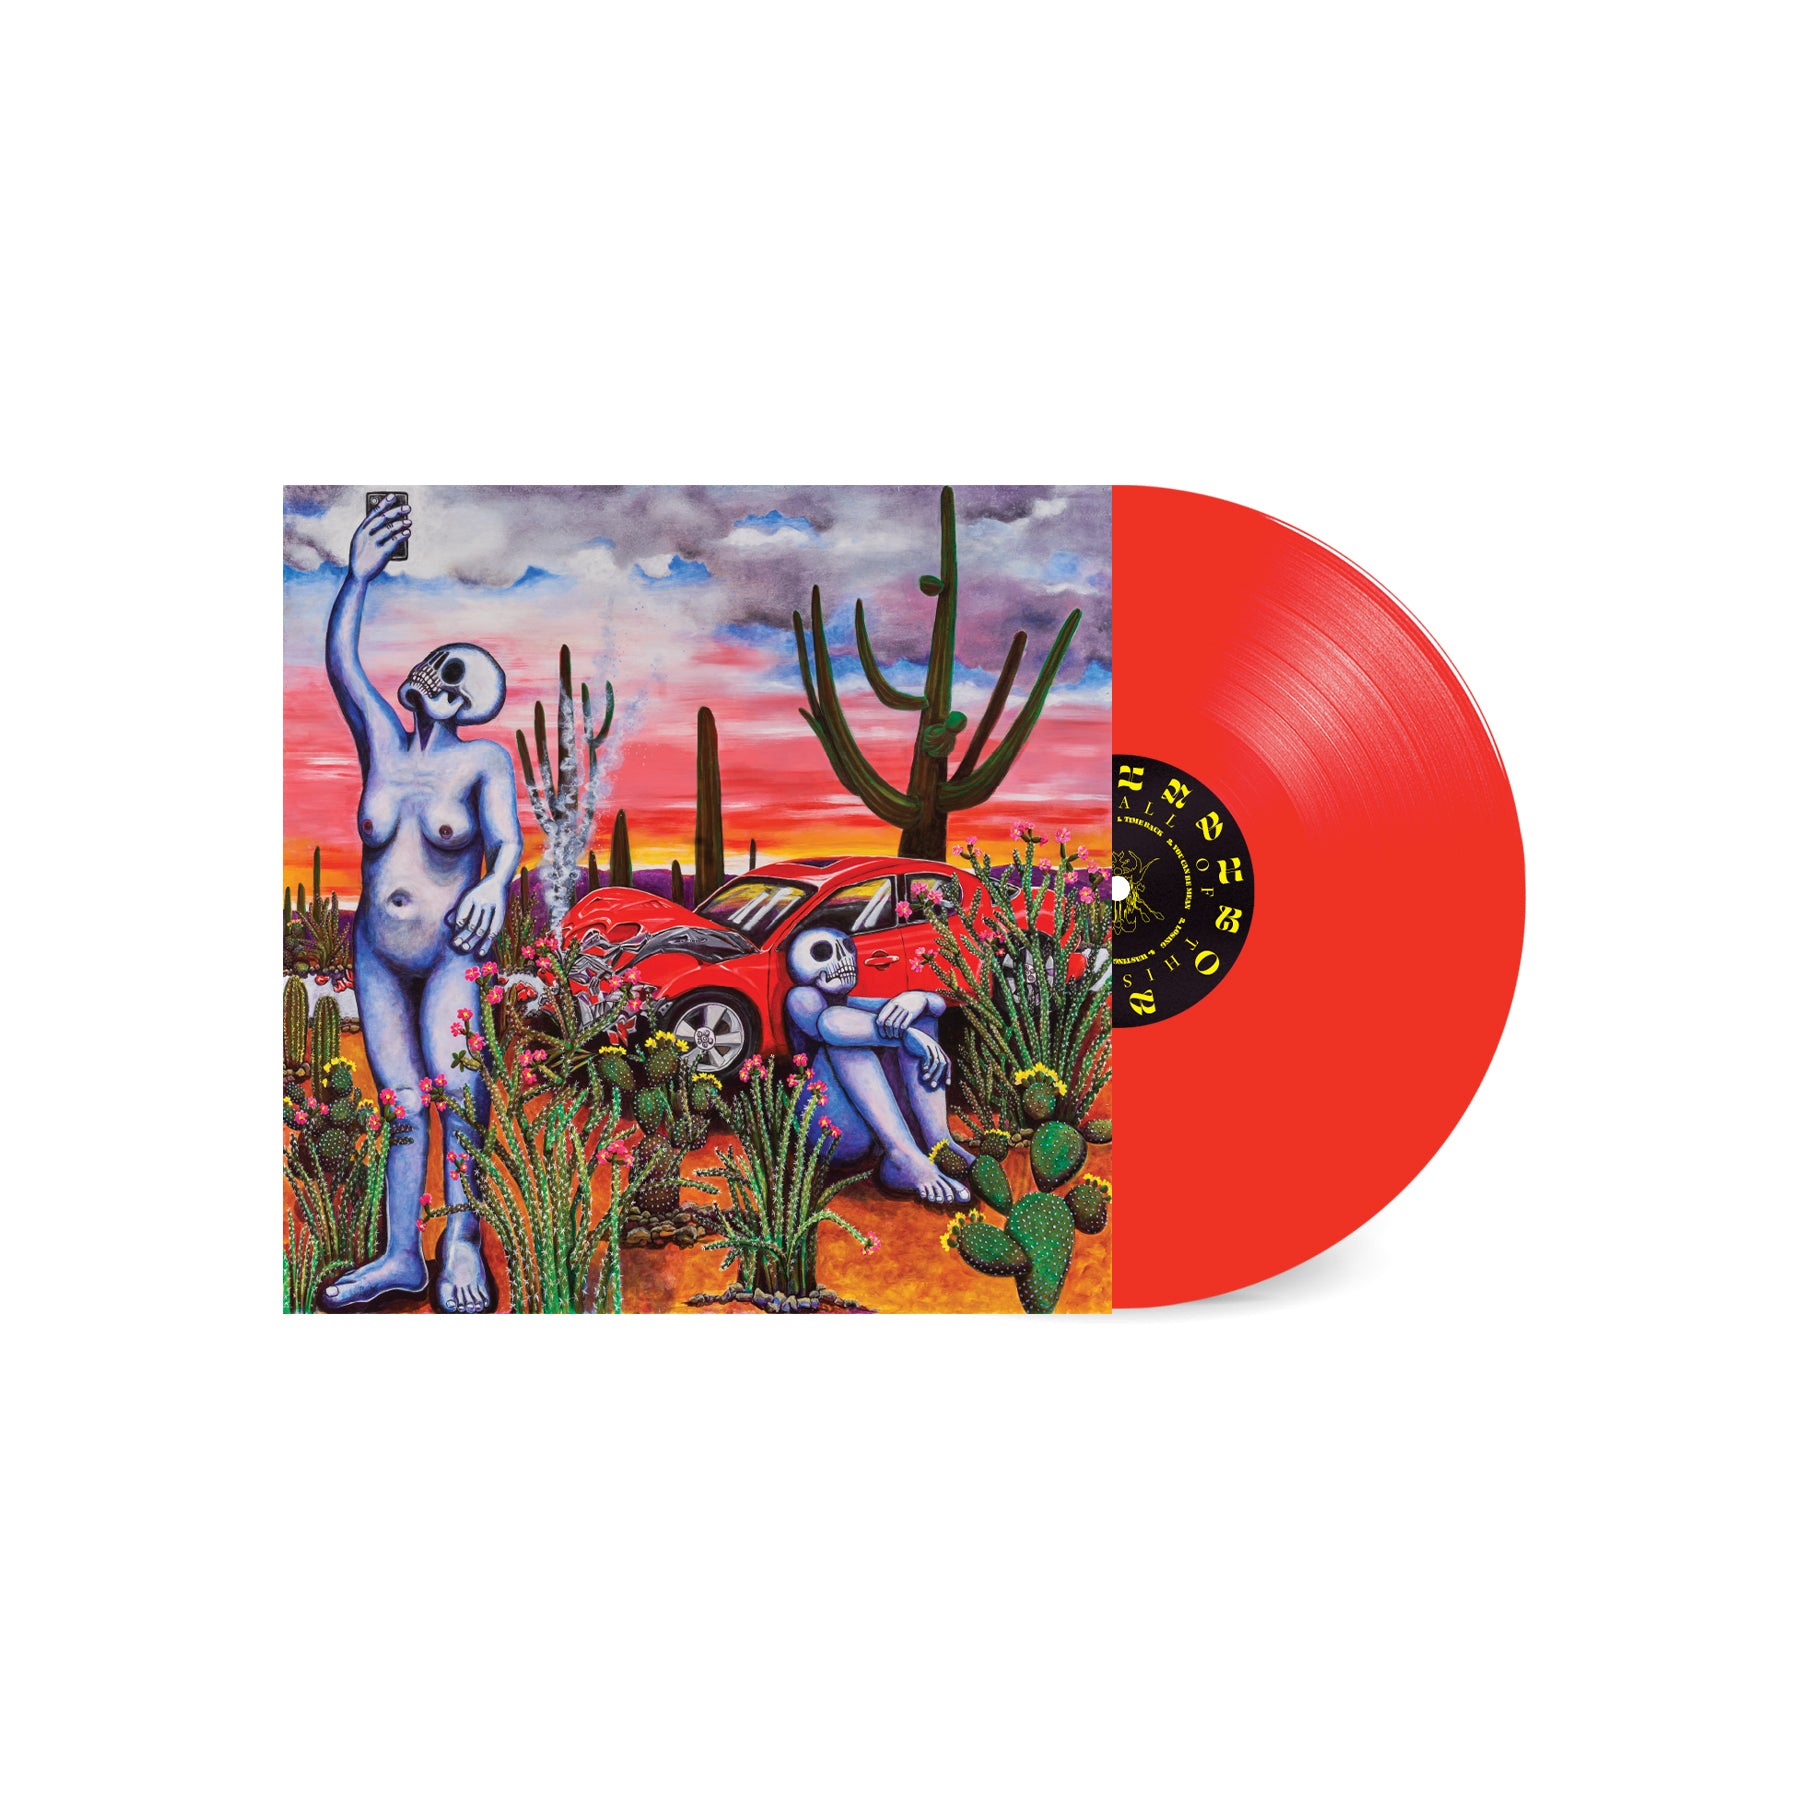 Indigo De Souza - All Of This Will End: Limited Red Vinyl LP